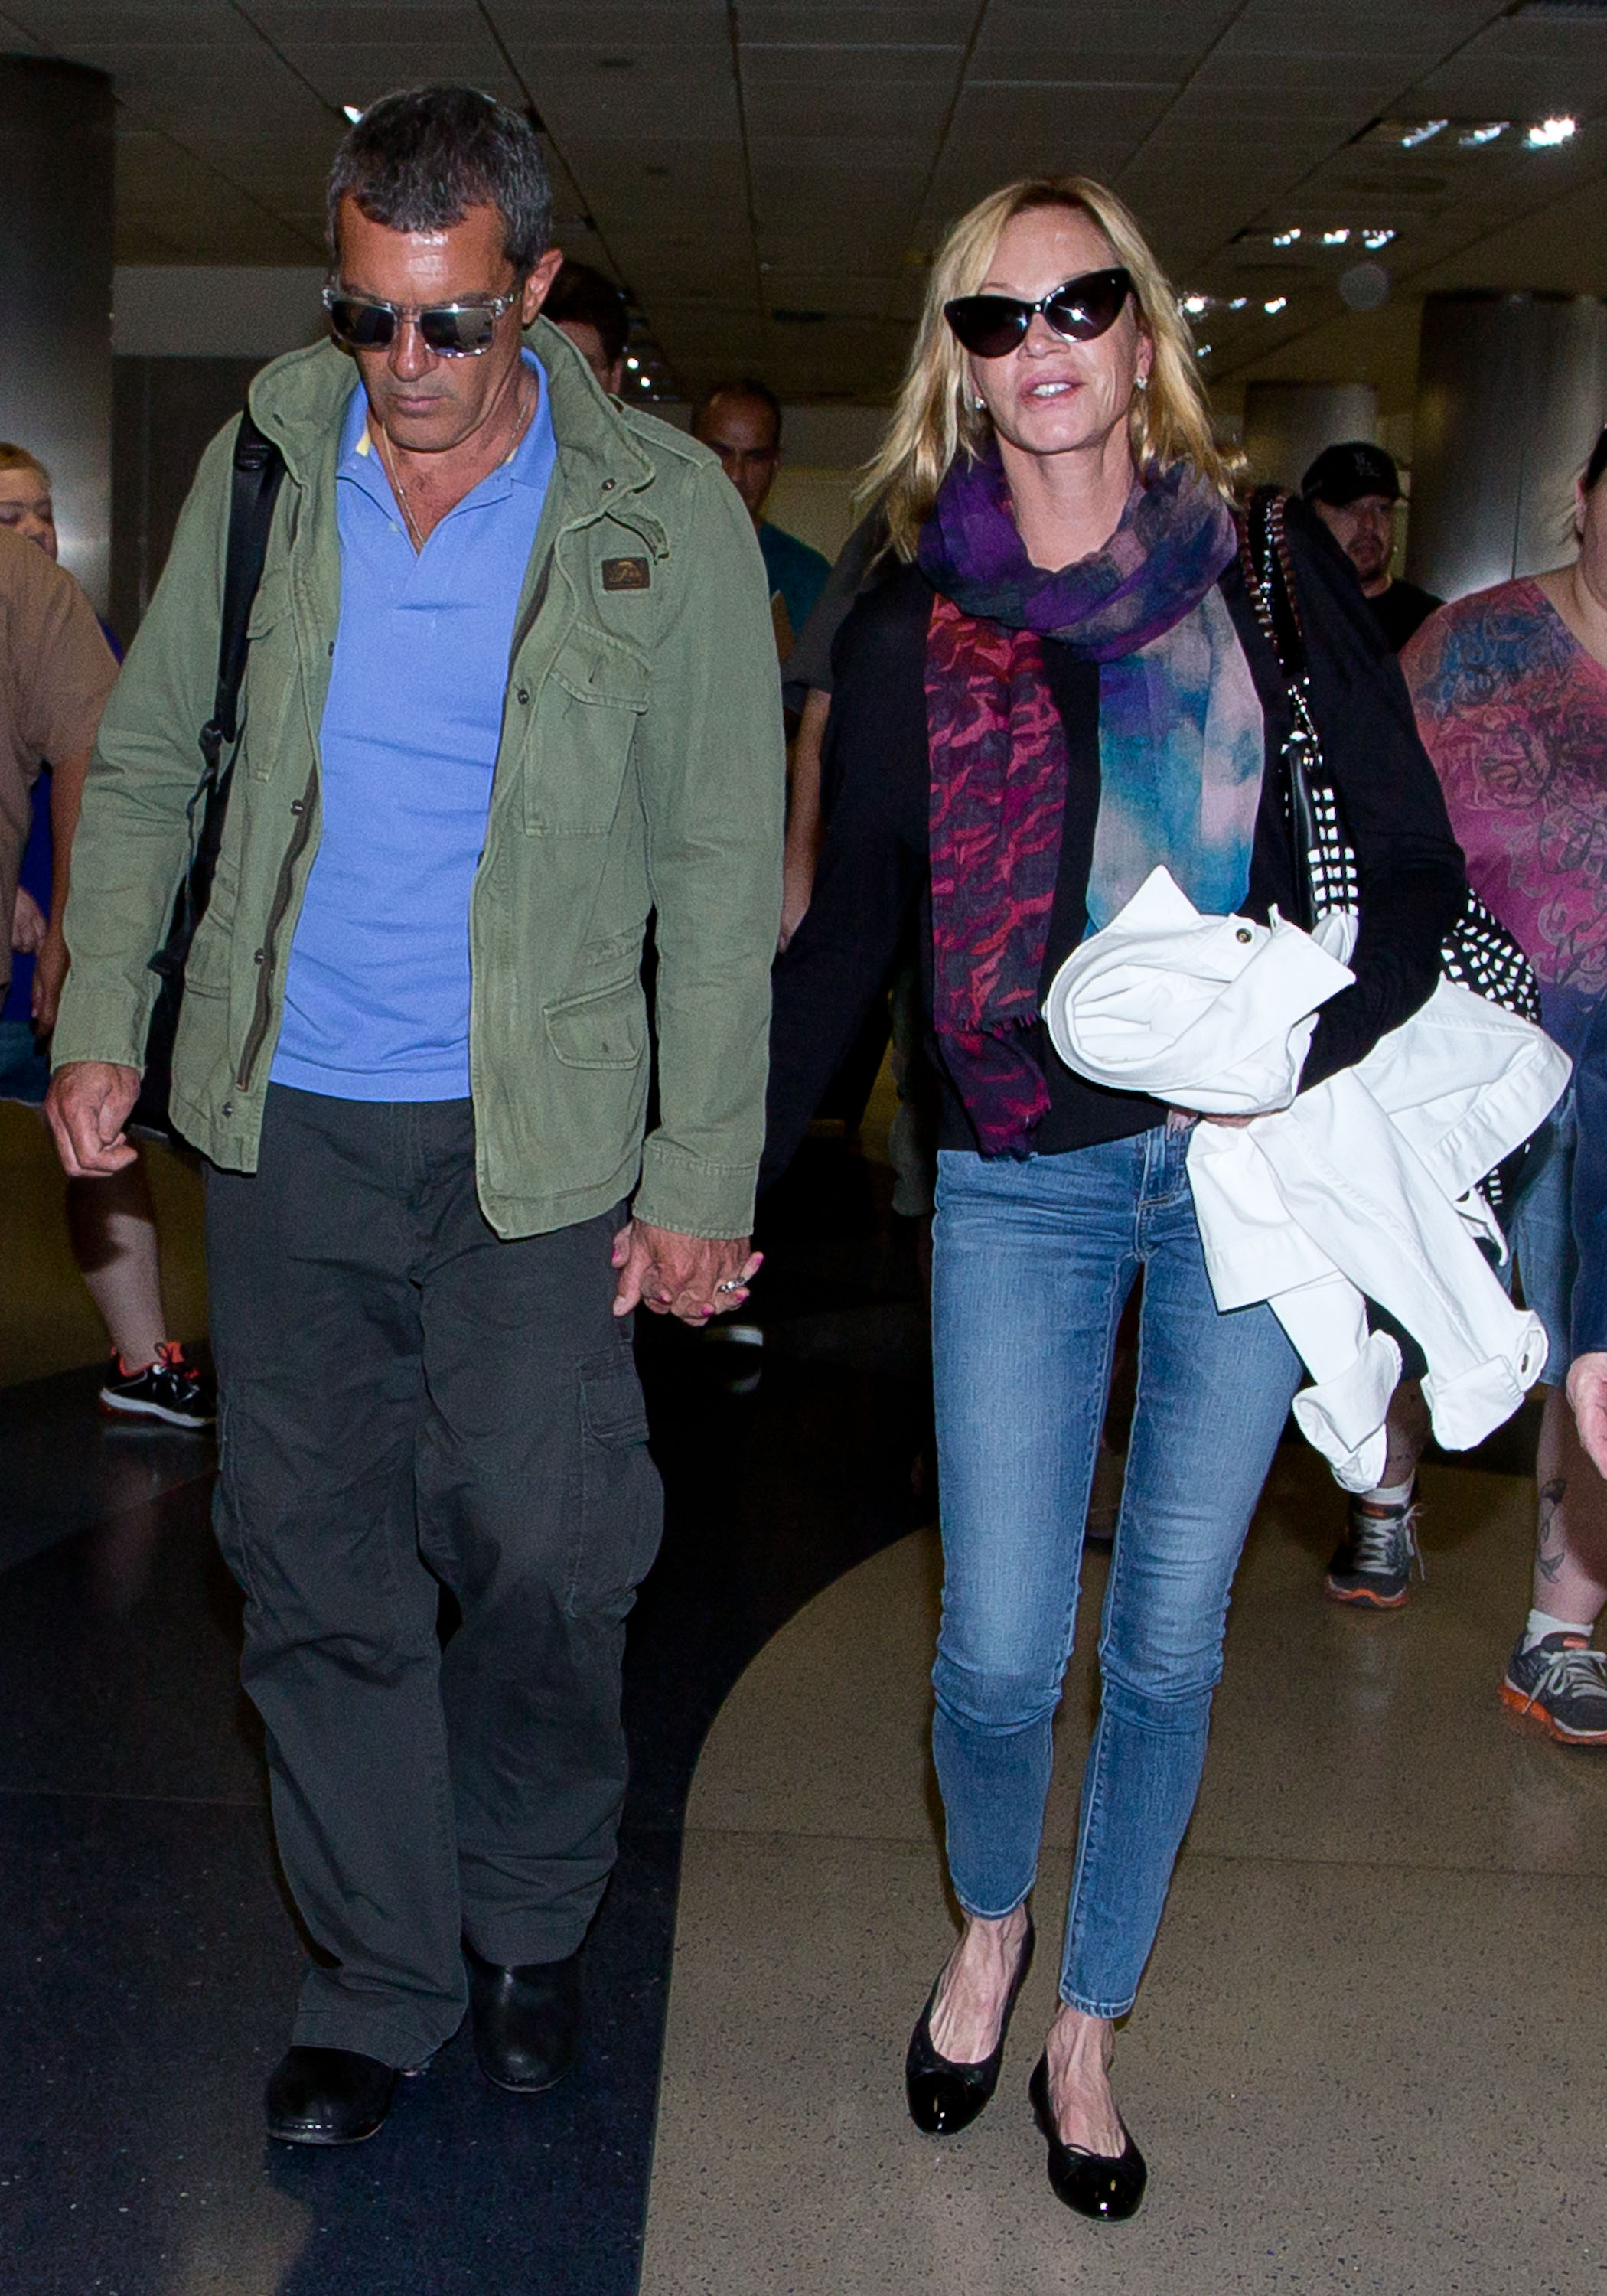 Antonio Banderas and Melanie Griffith spotted at LAX airport on March 16, 2014, in Los Angeles, California. | Source: Getty Images